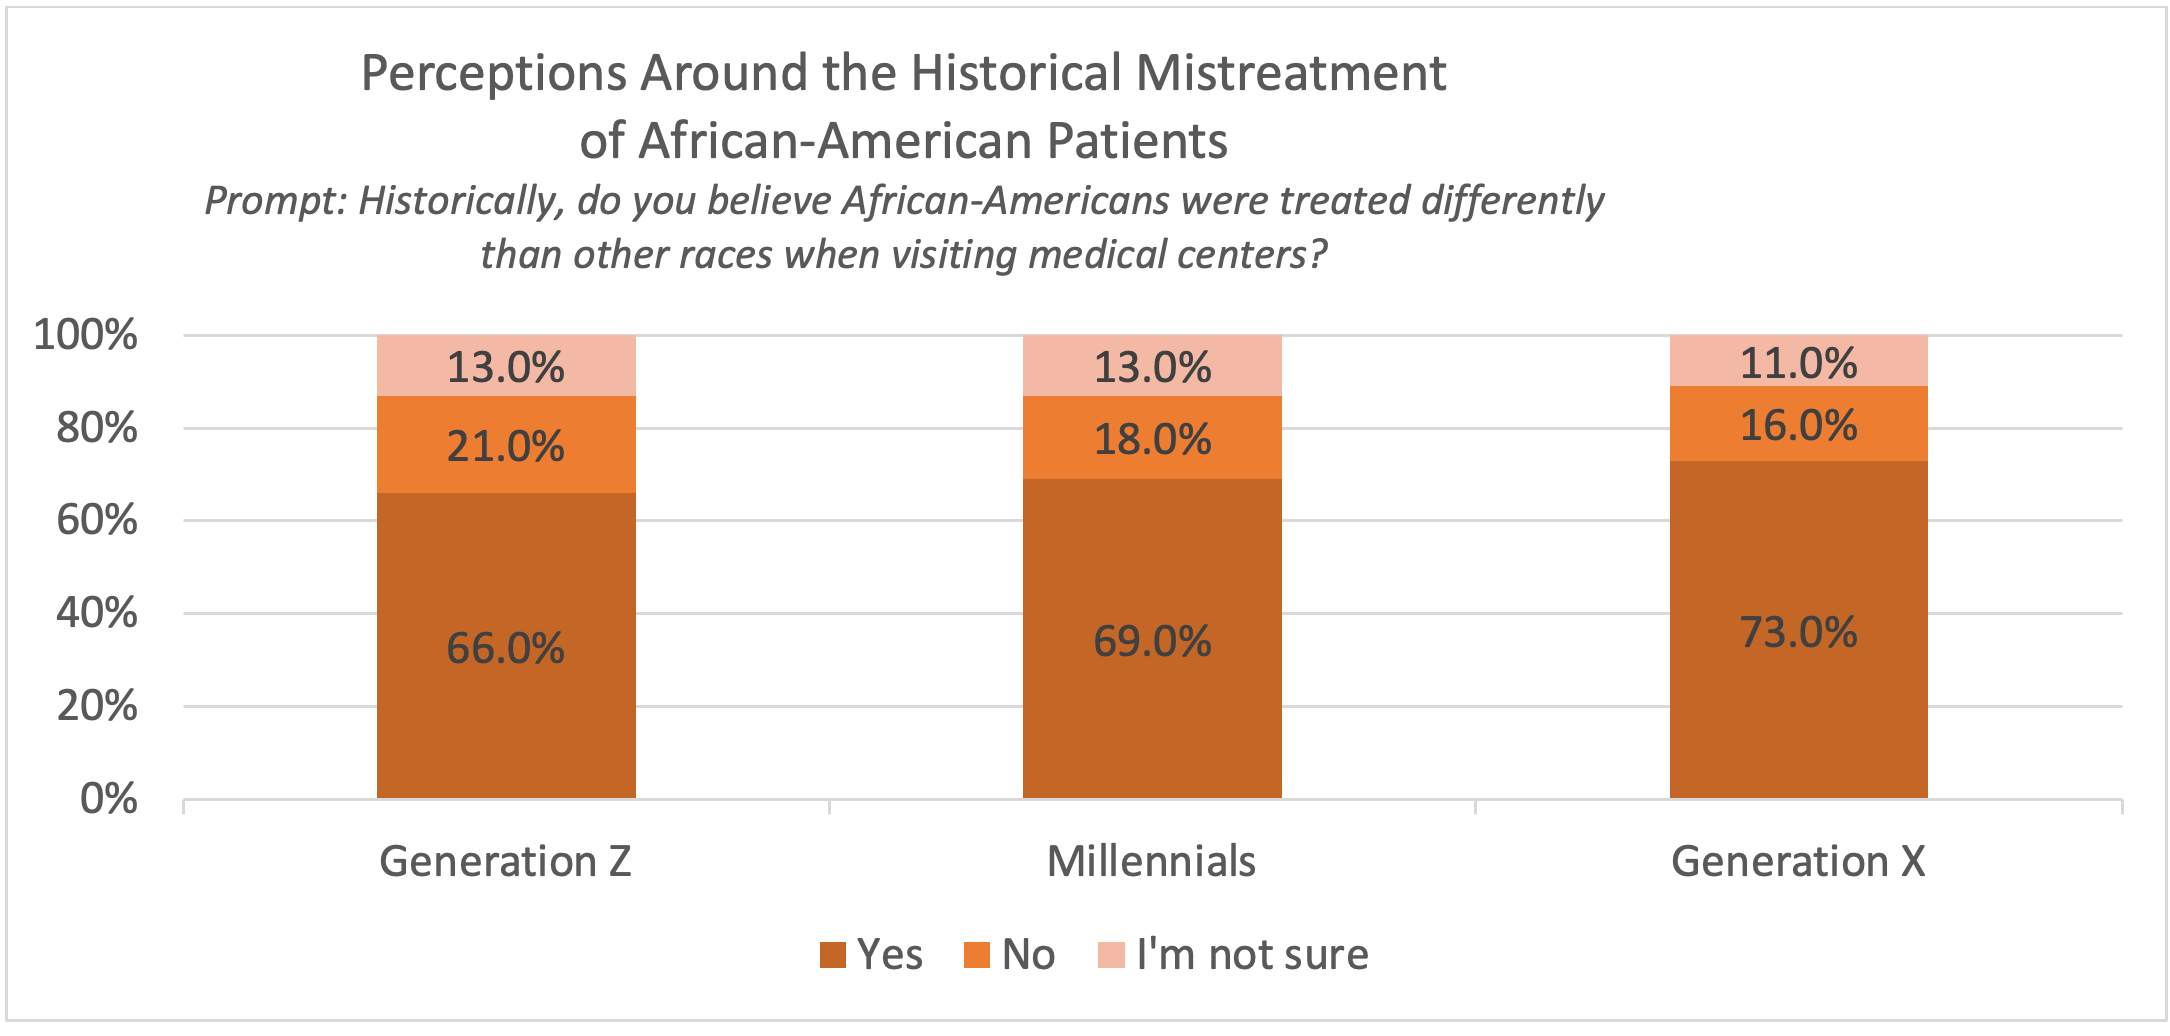 Table 8. Perceptions Around the Historical Mistreatment of African American Patients